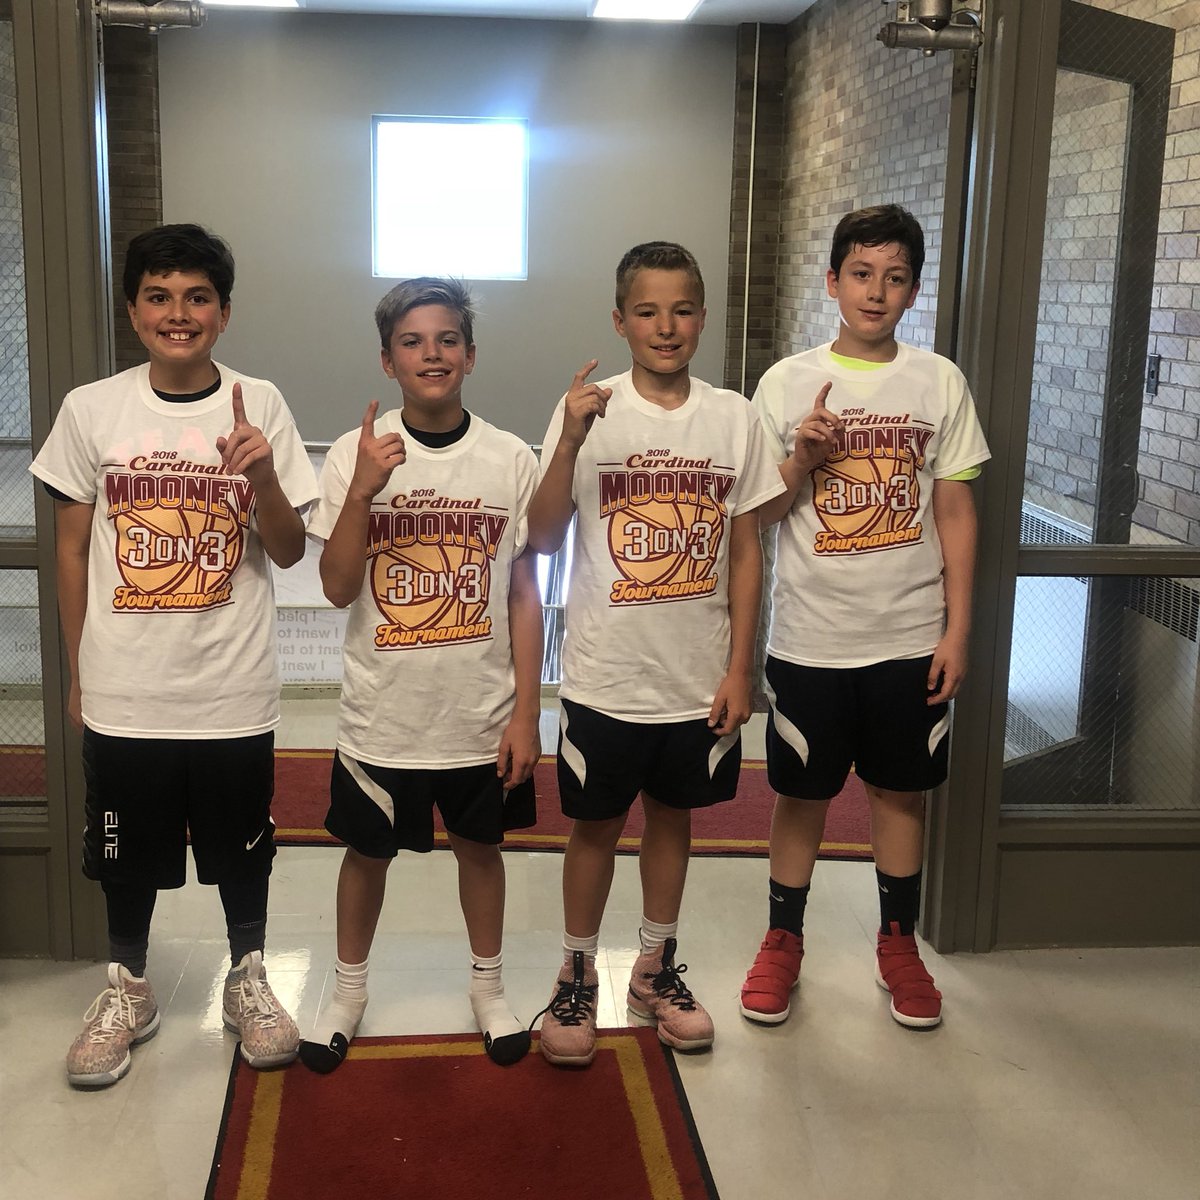 CMHS Inaugural 3 on 3 basketball tournament was a success.
Thanks to all of the ballers that participated & congrats to our bracket champions! Can’t wait ‘til next year. #3on3basketball #friendlycompetition